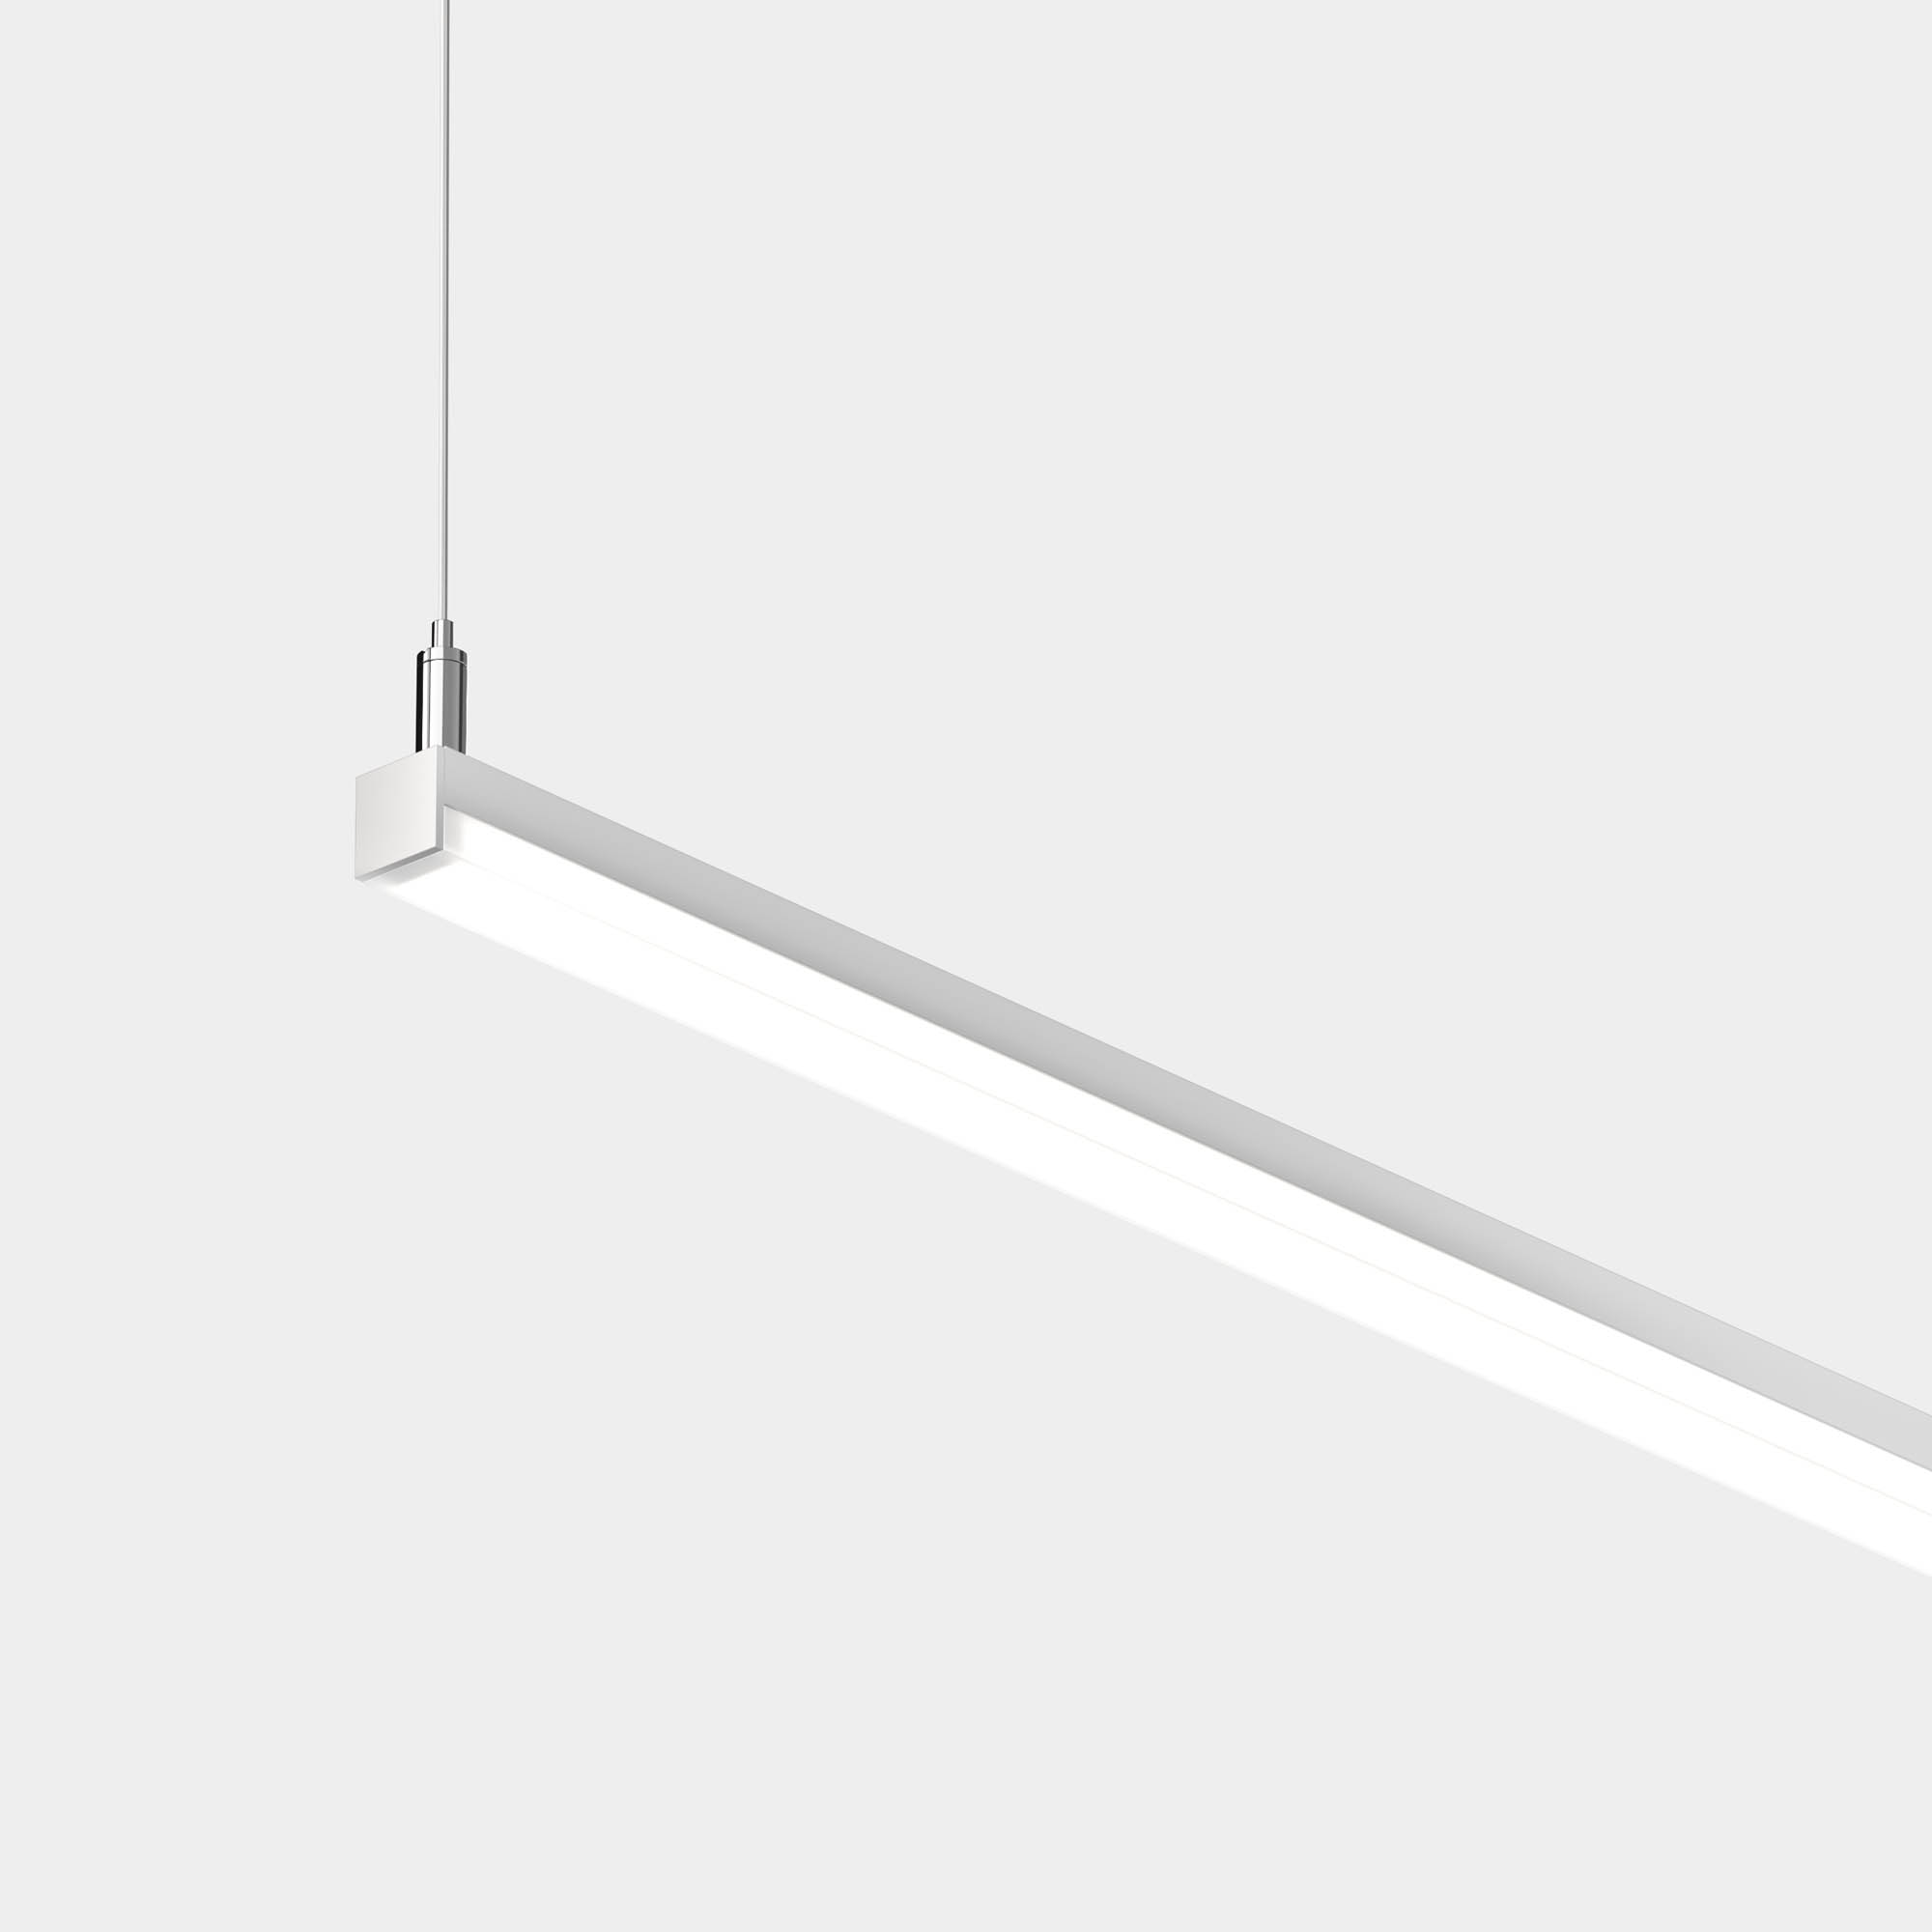 Clareo S/Q Suspended Static White